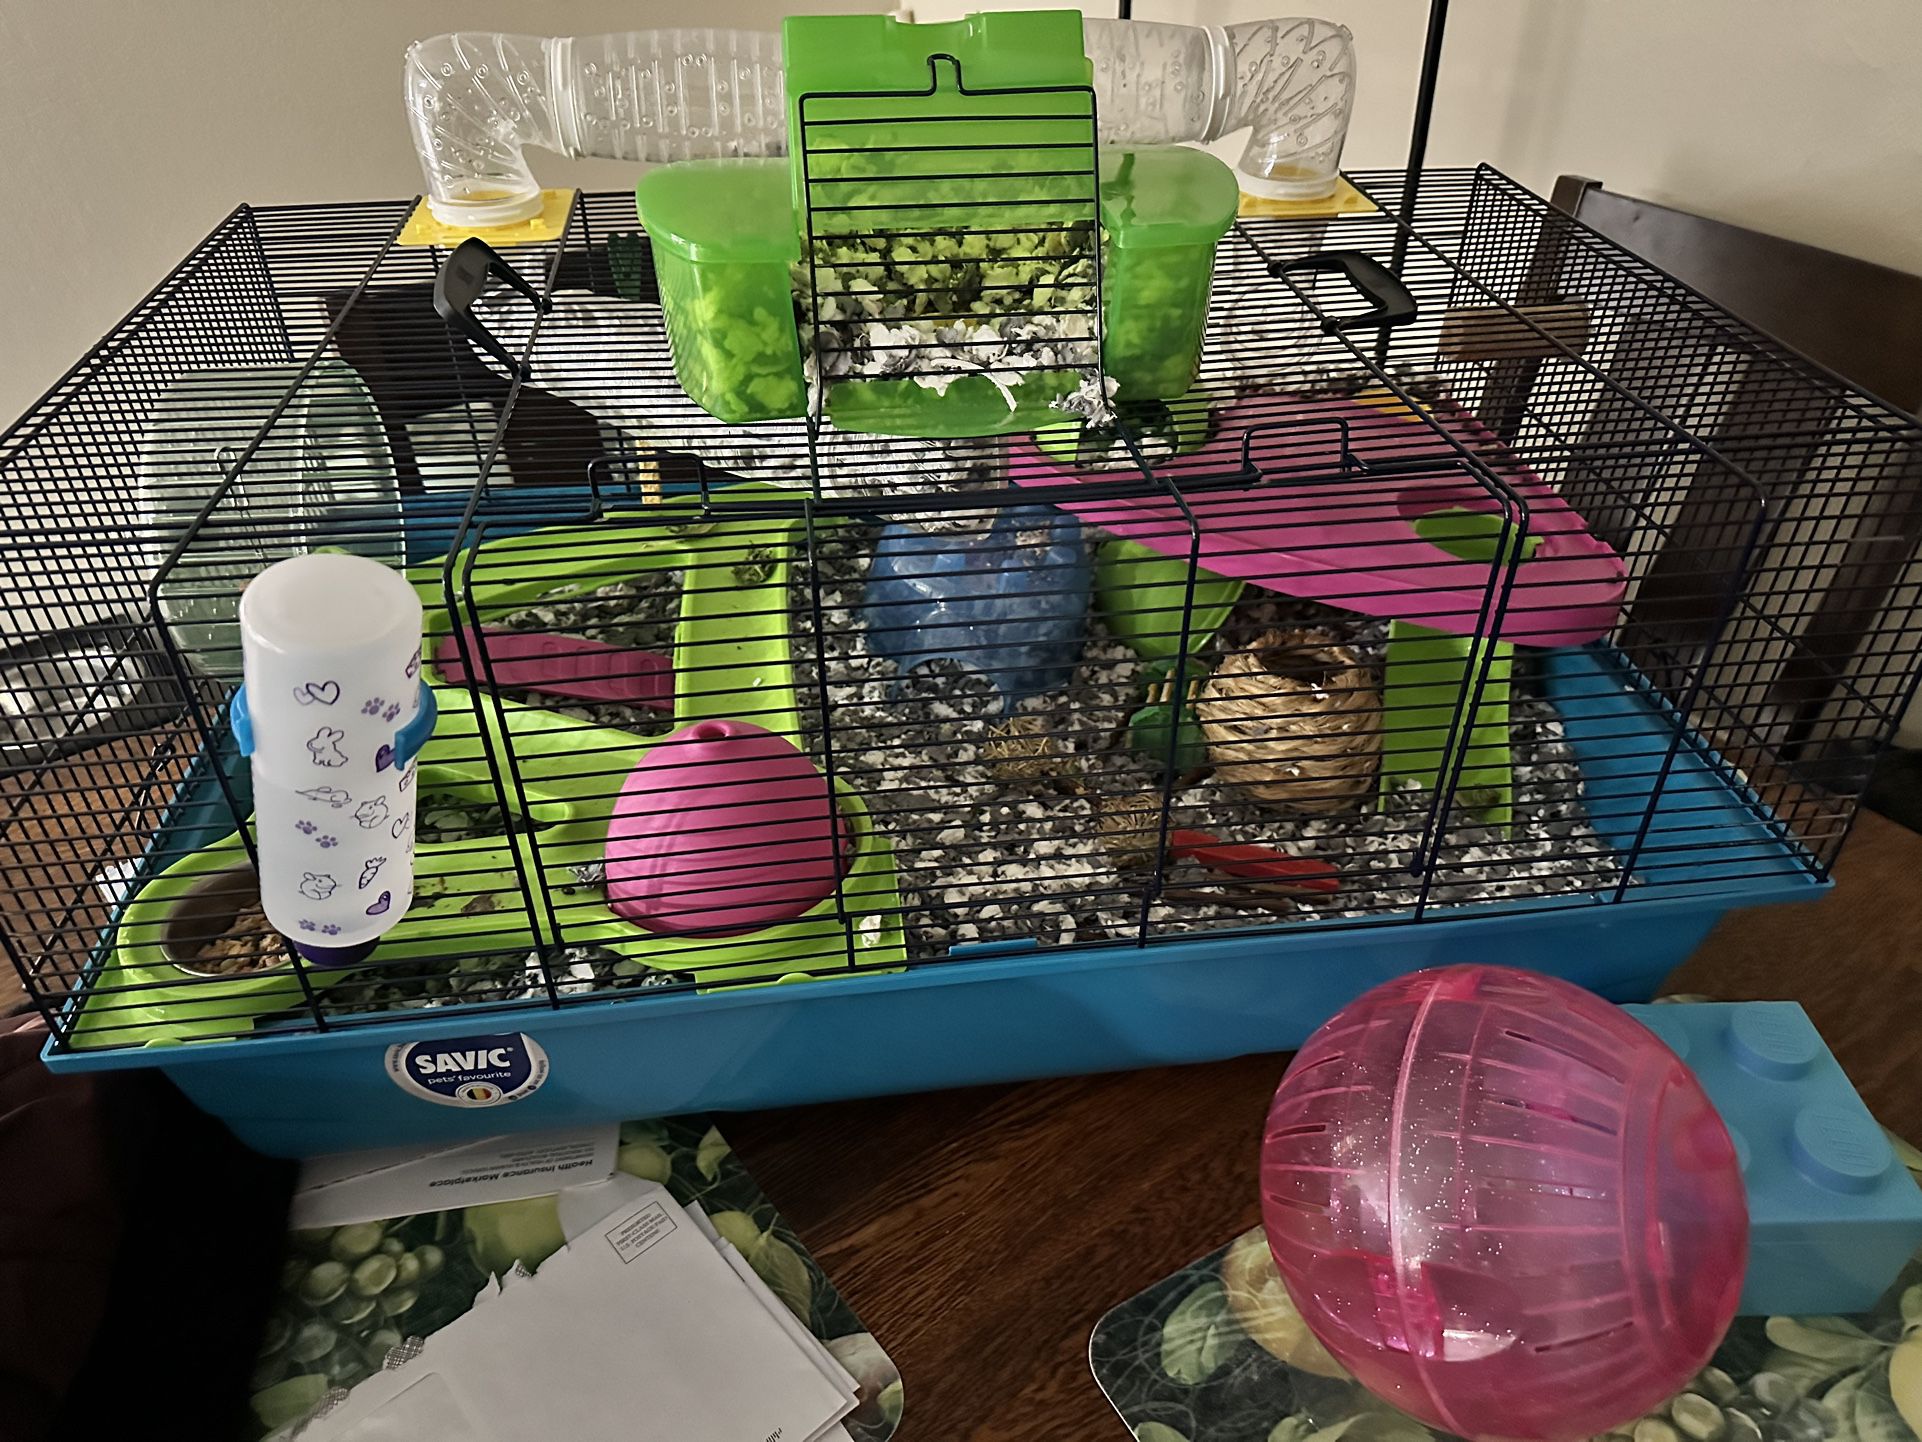 Heavenly Hamster Cage